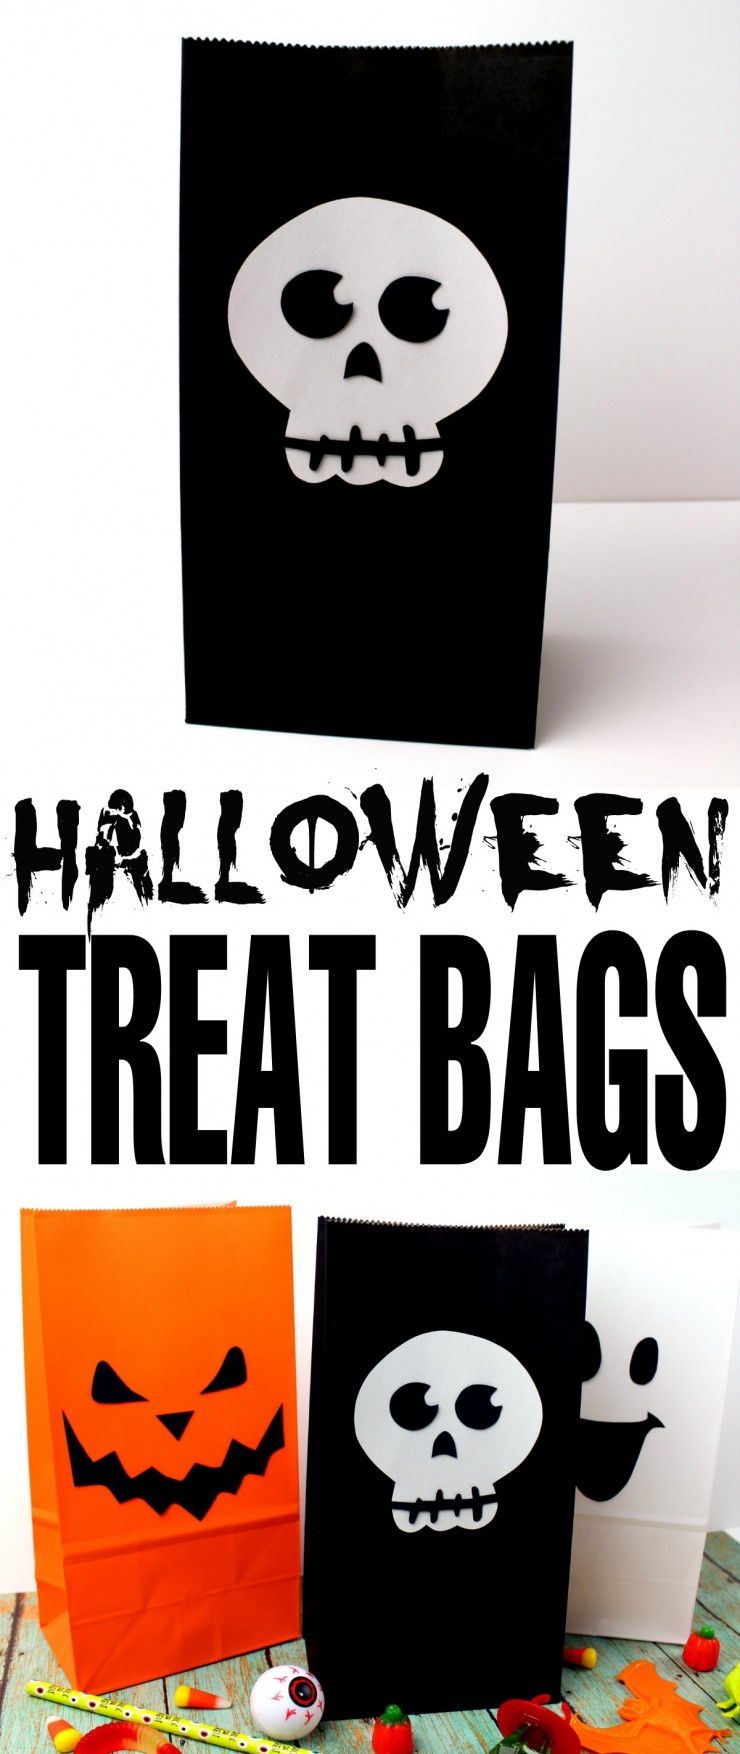 These Halloween Treat Bags are a fun Halloween craft for kids or parents - a fun way to present class Halloween treats or as Halloween party loot bags! Super simple and with free printable templates, these bags are a breeze to put together!